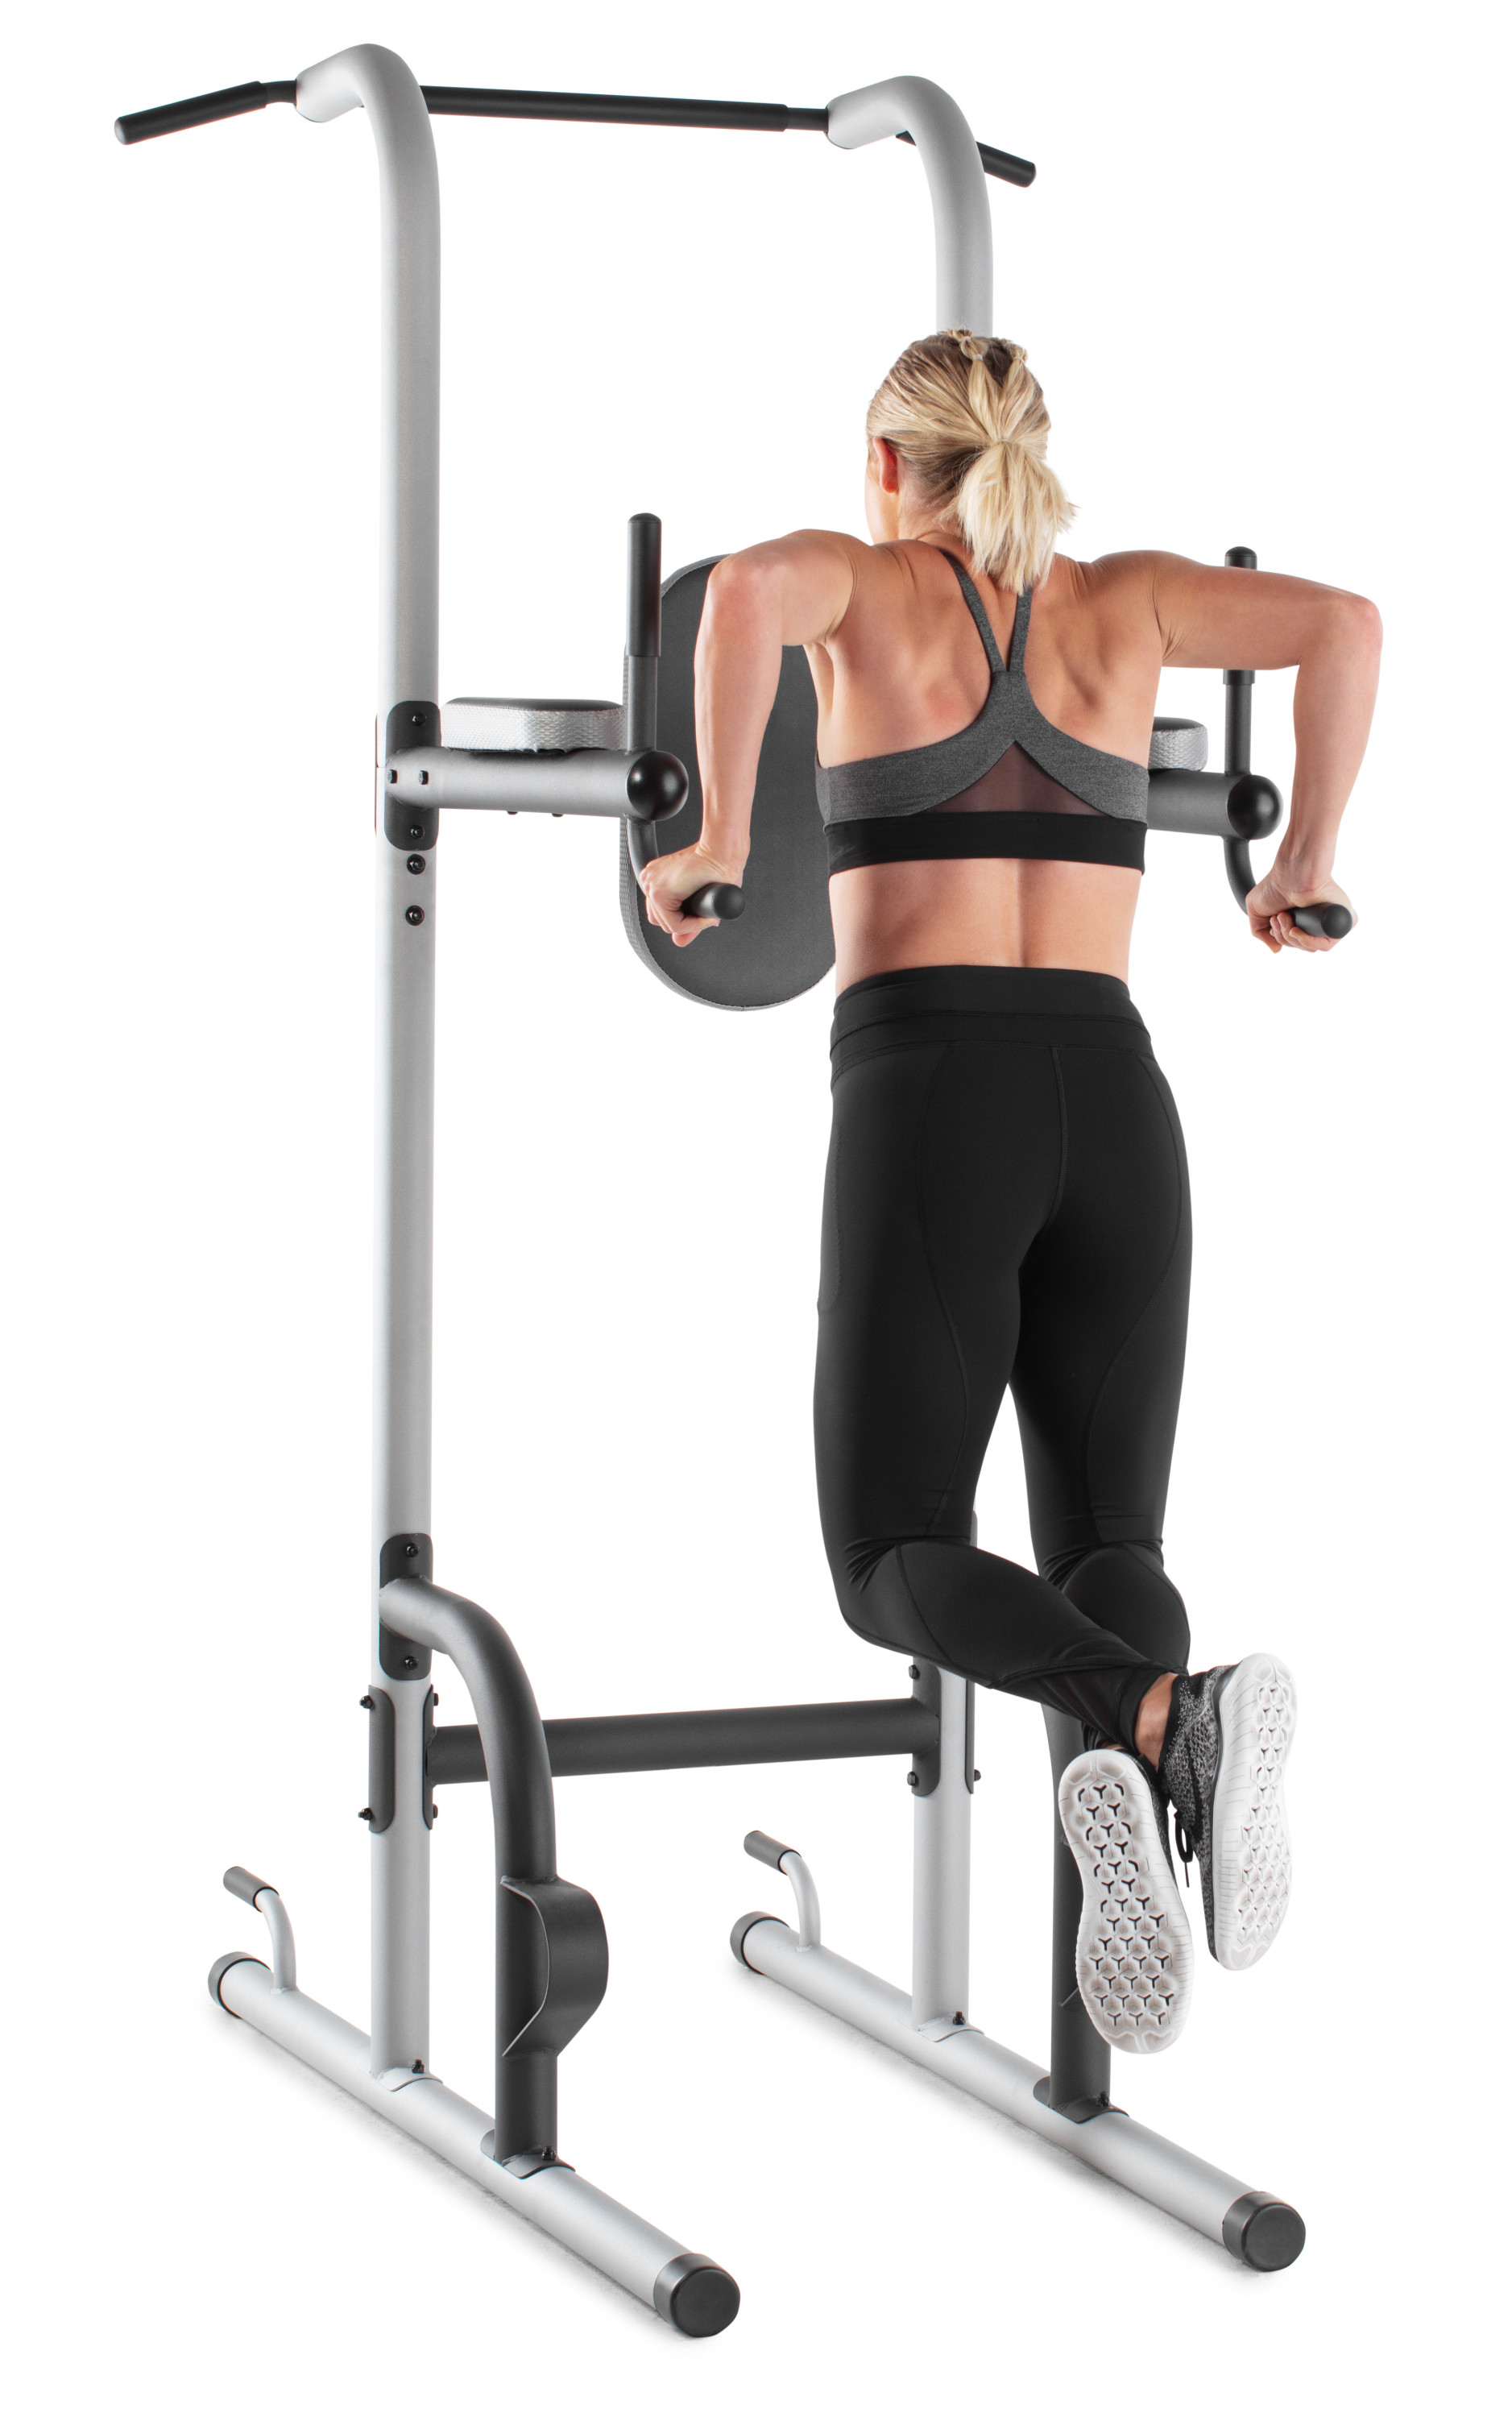 ProForm XR 10.9 Power Tower with Push-Up, Pull-Up & Dip Stations, 300 Lb. Weight Limit - image 4 of 9